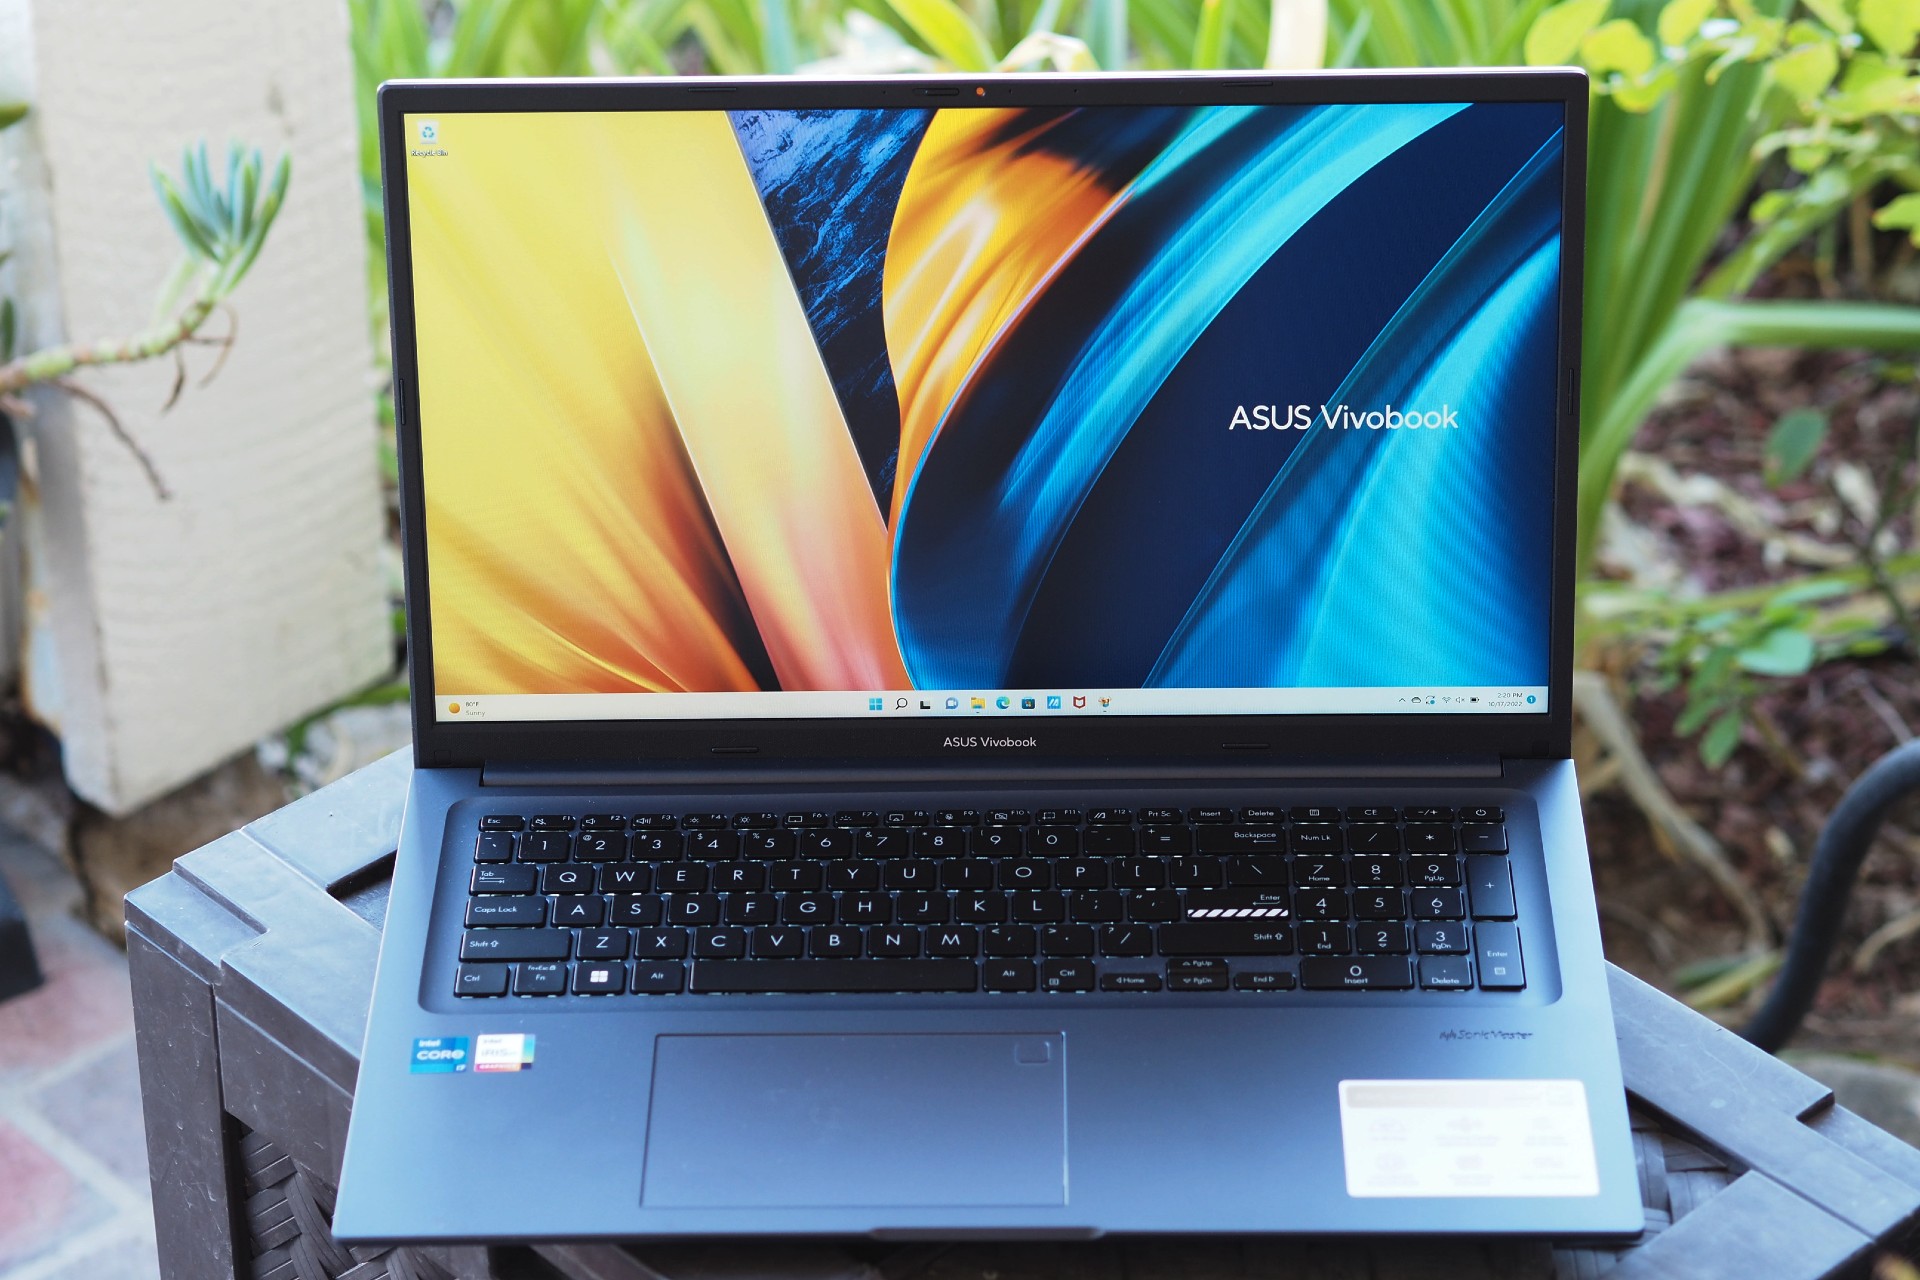 The Best Asus Vivobook Pro 15 prices right now